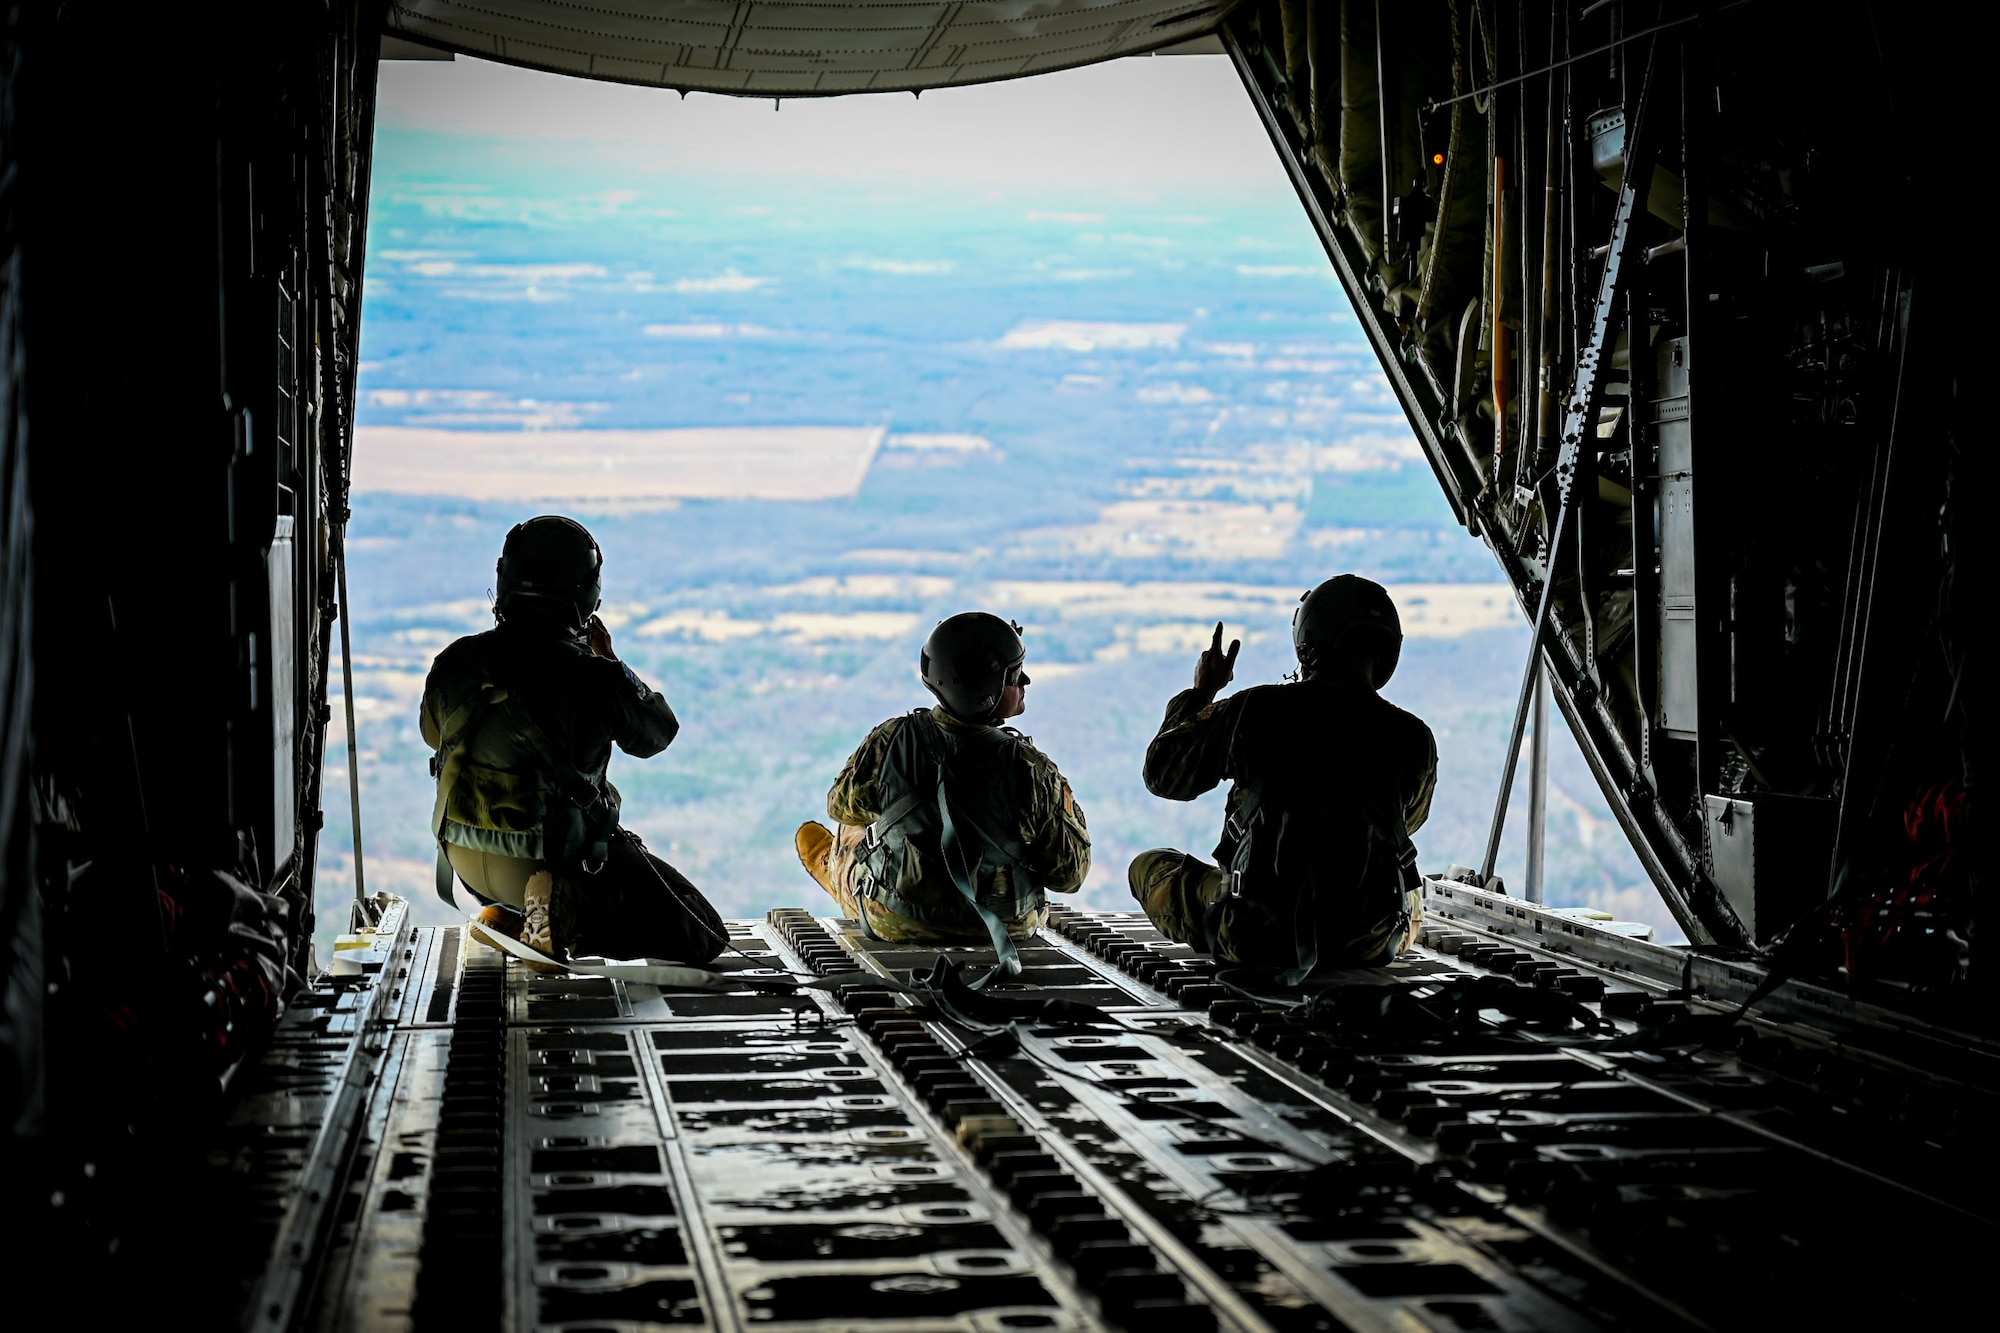 Three Airmen sit in the back of a flying a C-130J Super Hercules aircraft